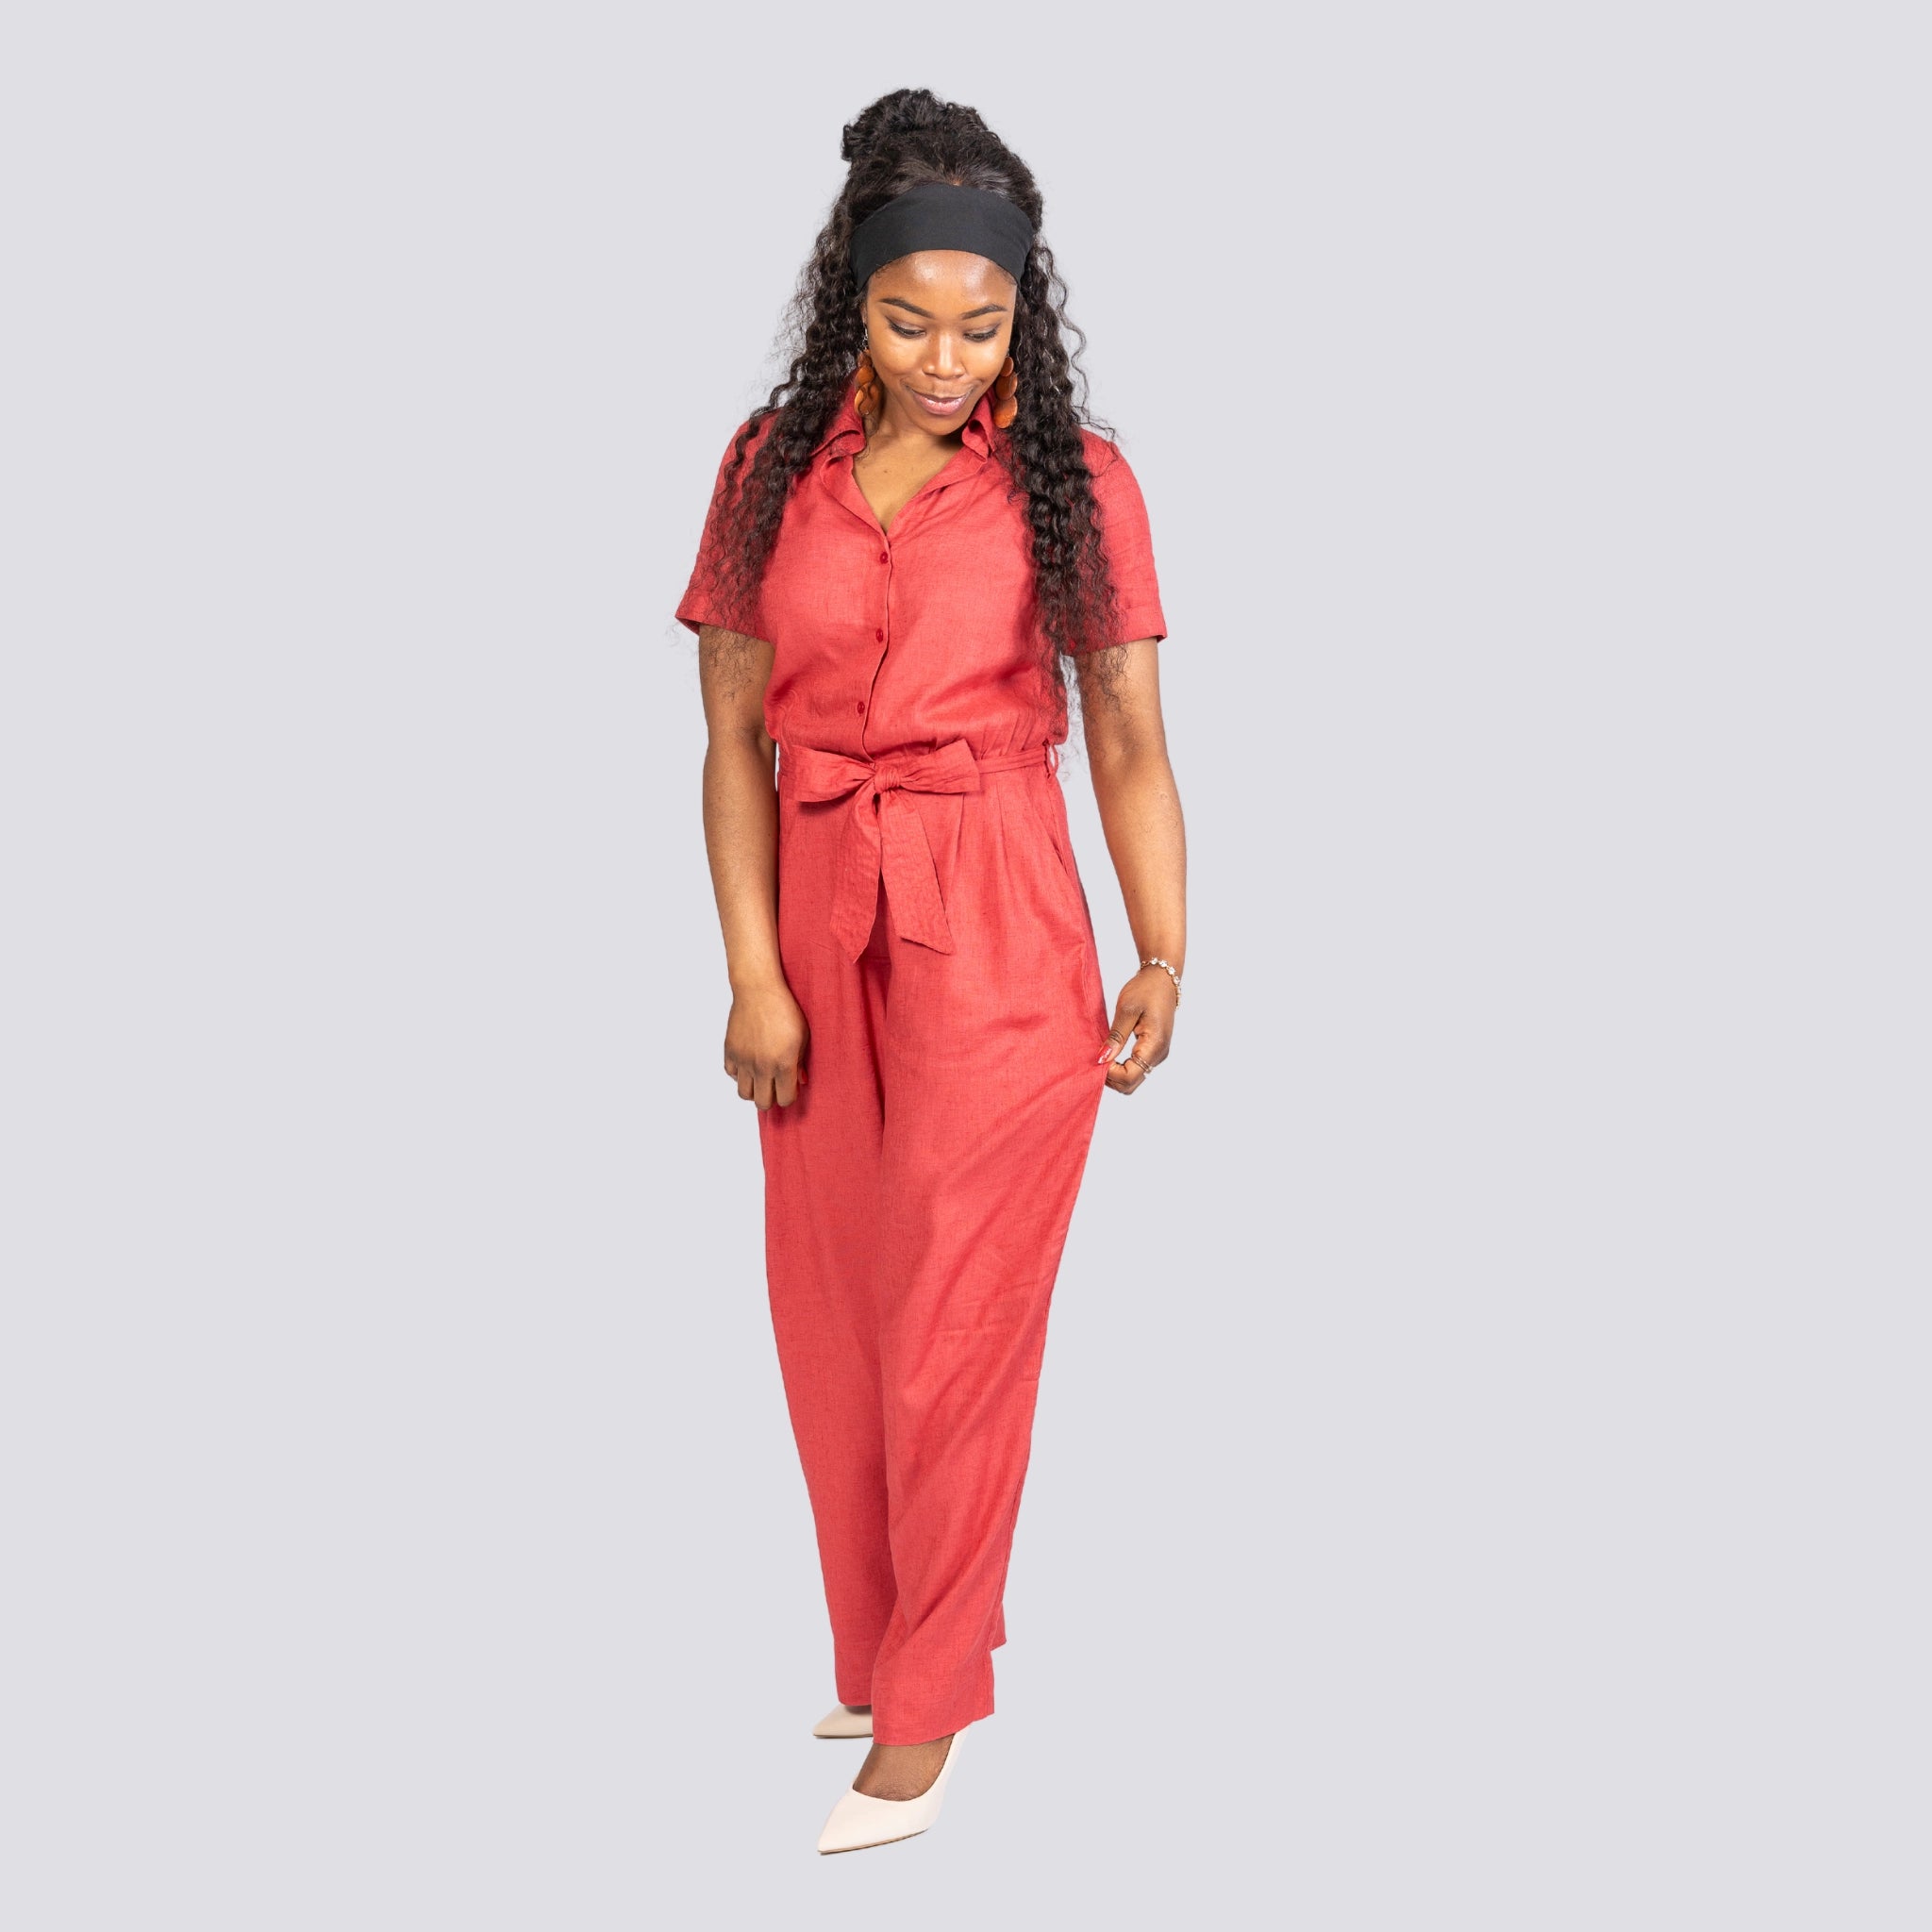 A woman in a Karee Milano Red Serenity Viscose Linen Jumpsuit and white heels looks down while walking, isolated on a gray background.